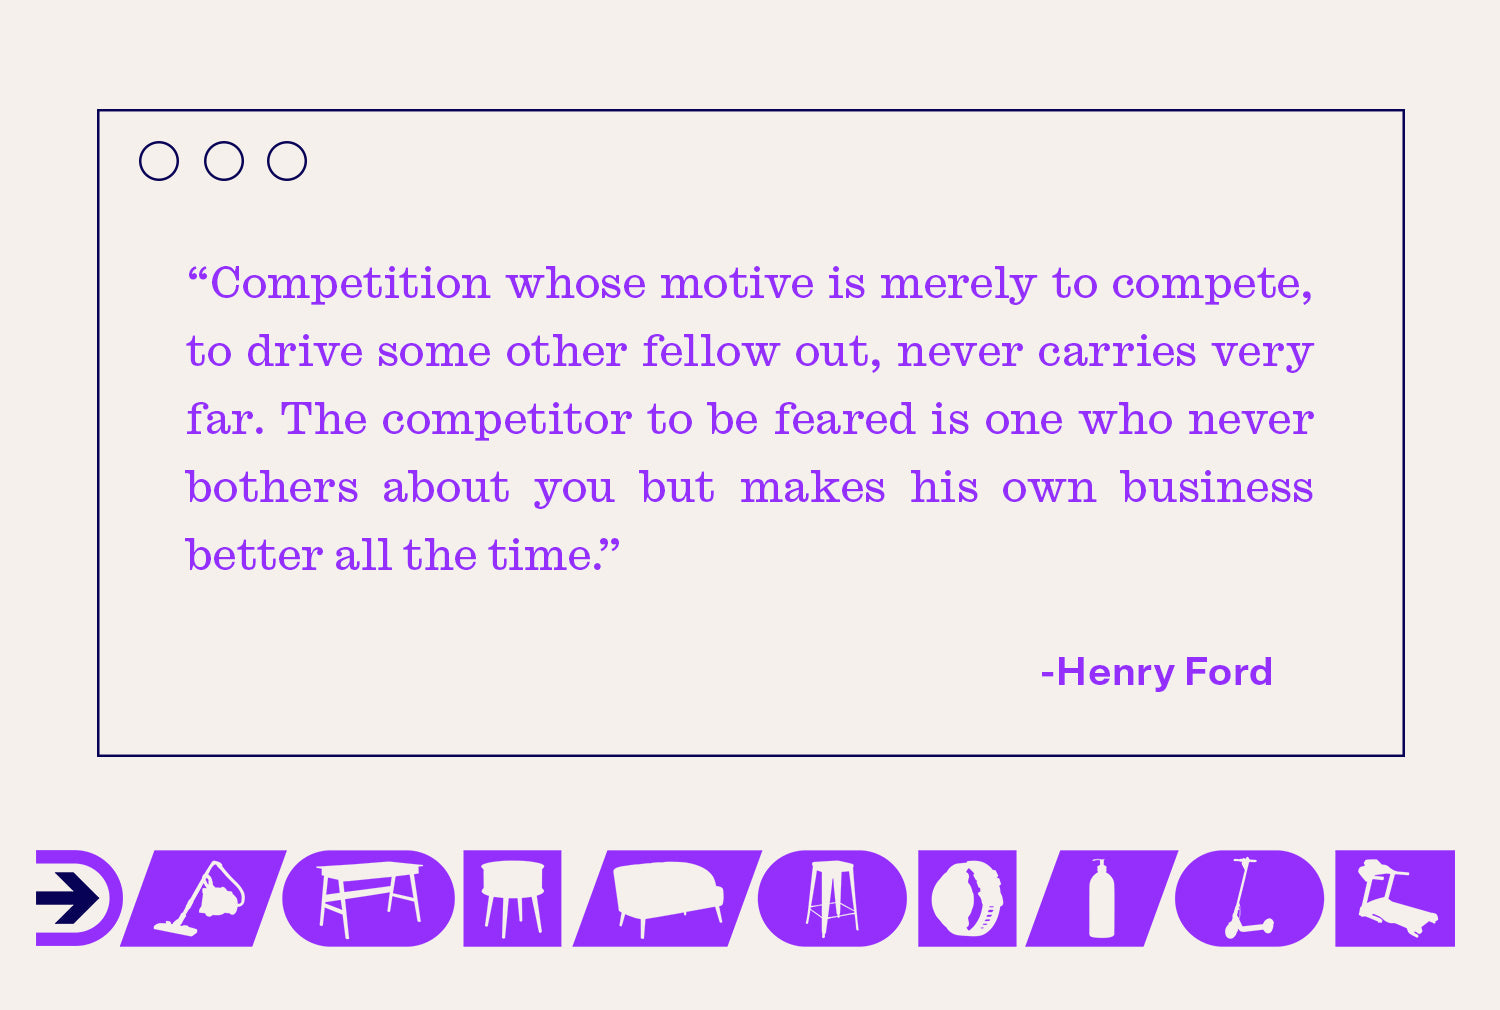 Henry Ford once said "Competition whose motive is merely to compete, to drive some other fellow out, never carries very far."